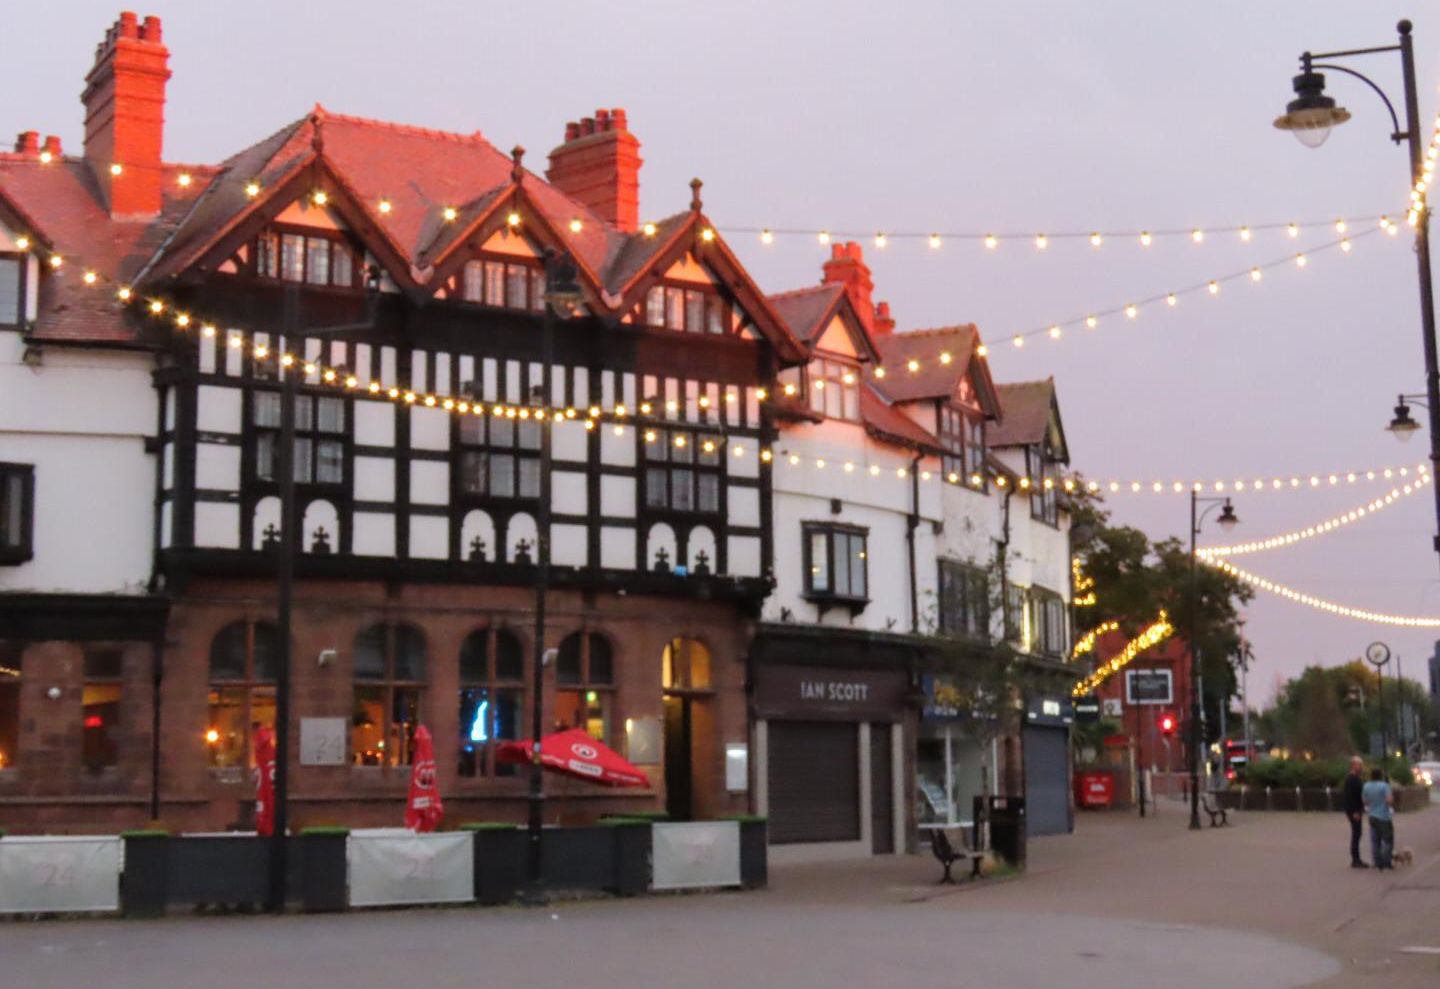 Crosby Village has been lit up by lighting firm IllumiDex UK Ltd. Photo by Andrew Brown Media